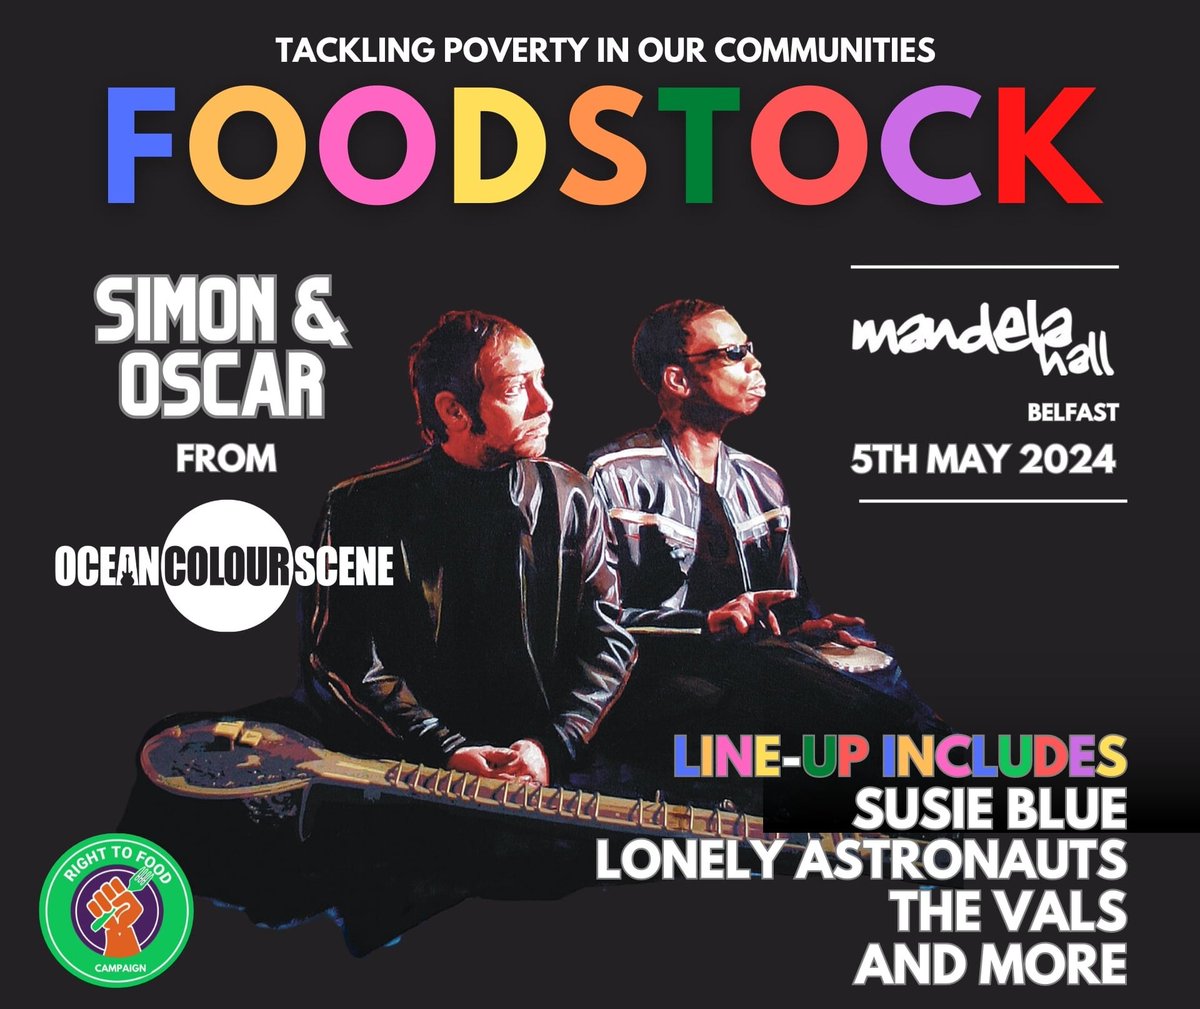 Only a handful of tickets remain for our @Foodstock__ event at Mandela Hall next weekend. It's looking like we will have a full-house! Tickets are free, all we ask is to bring along non-perishable food items. #SolidarityNotCharity #RightToFood